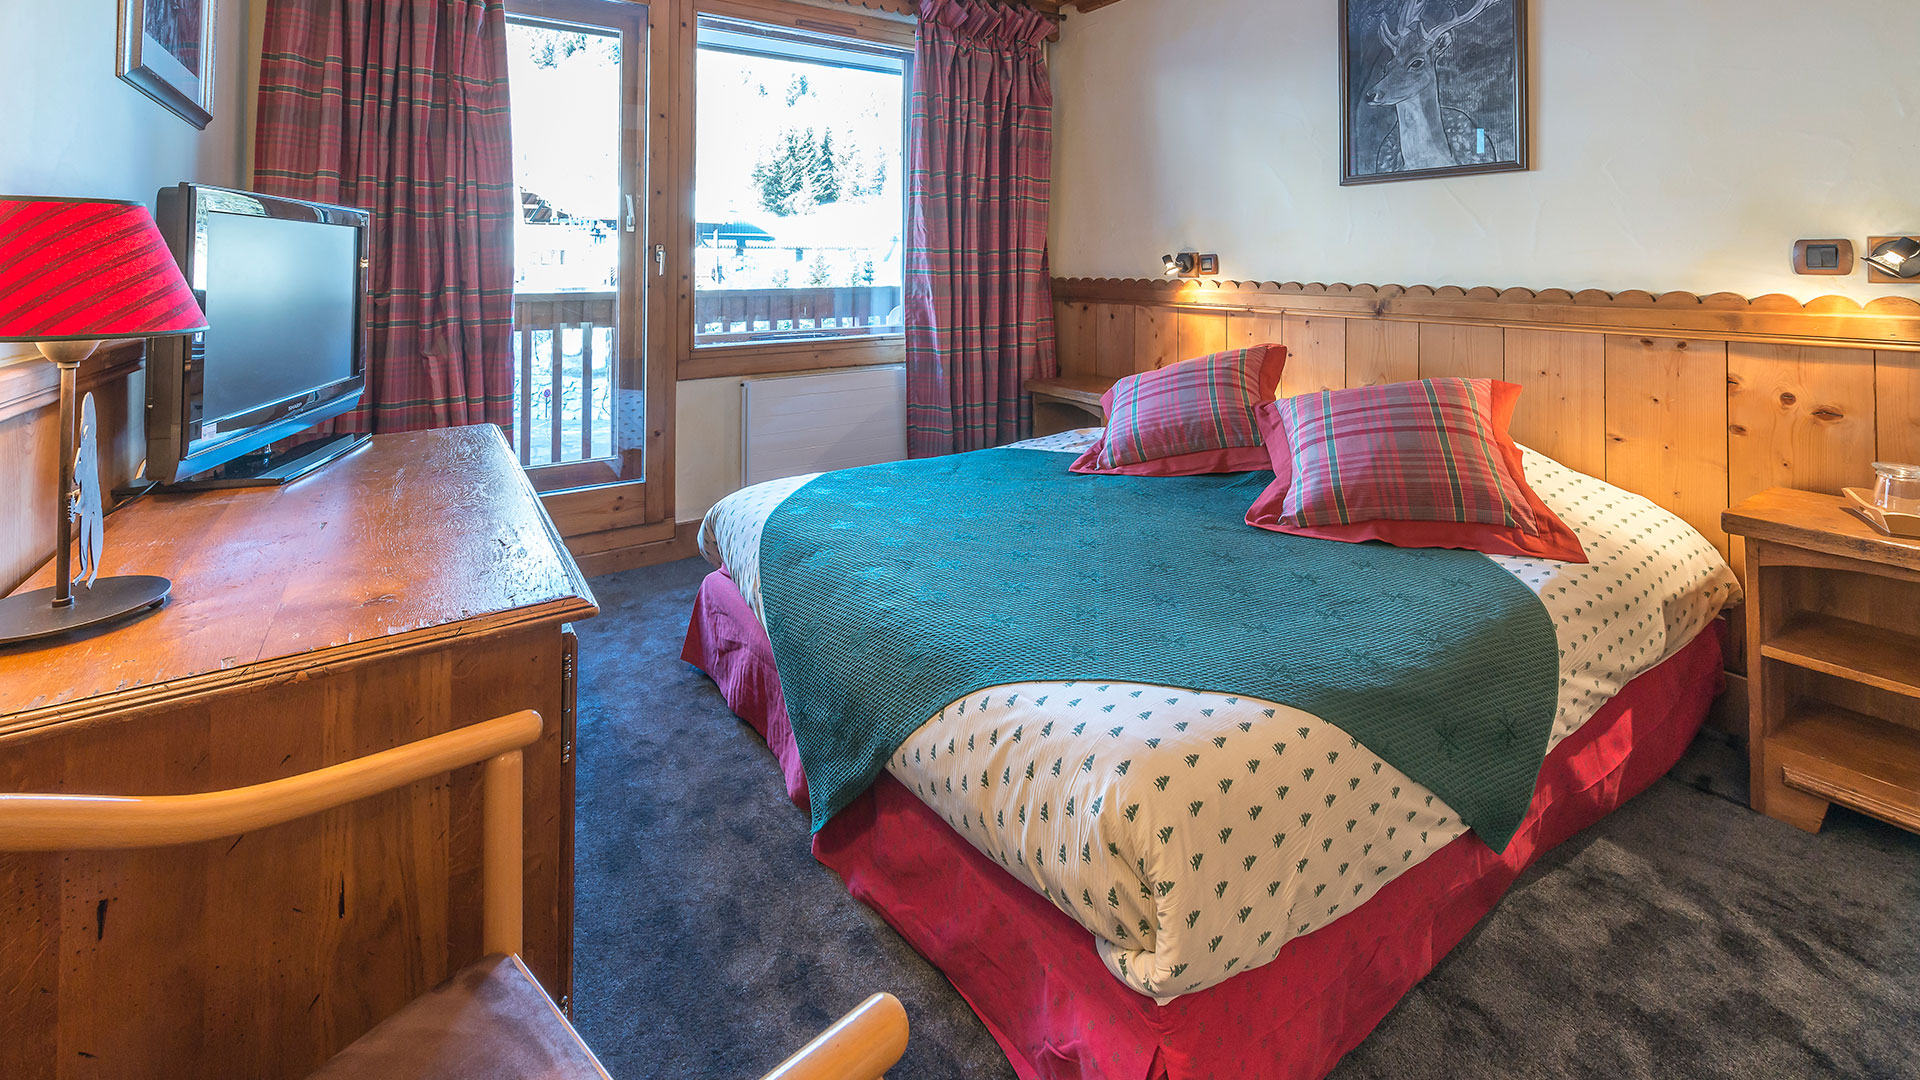 Chambre traditionnelle weekend ski Méribel